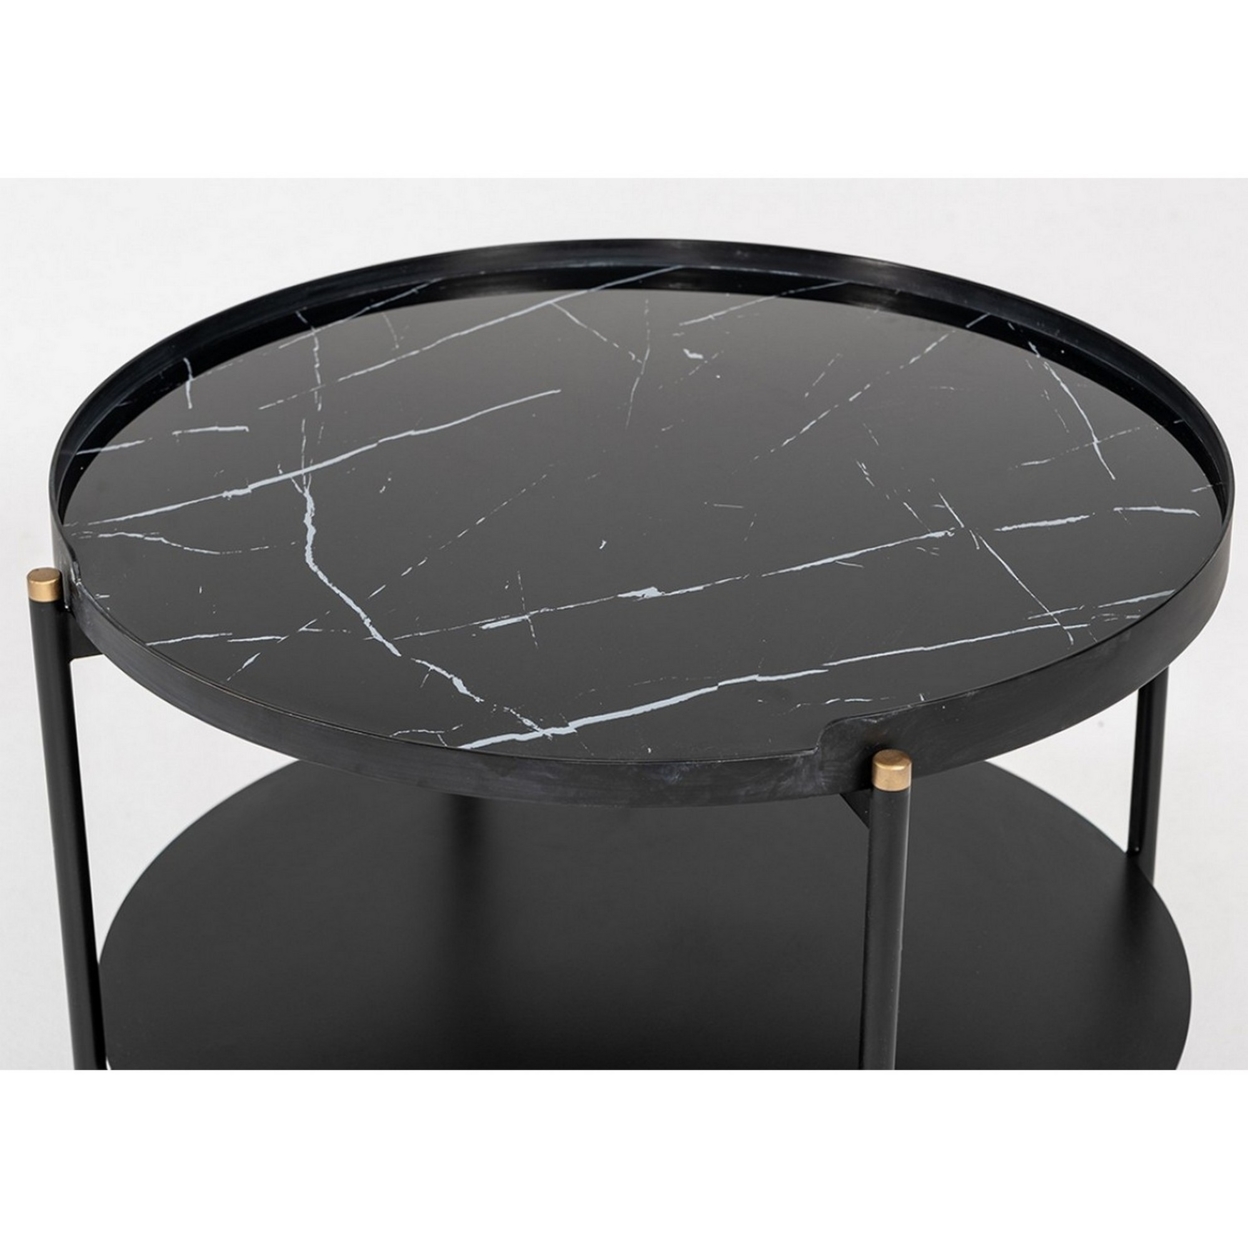 Round Metal Coffee Table With Marble Painted Tray Top, Black- Saltoro Sherpi